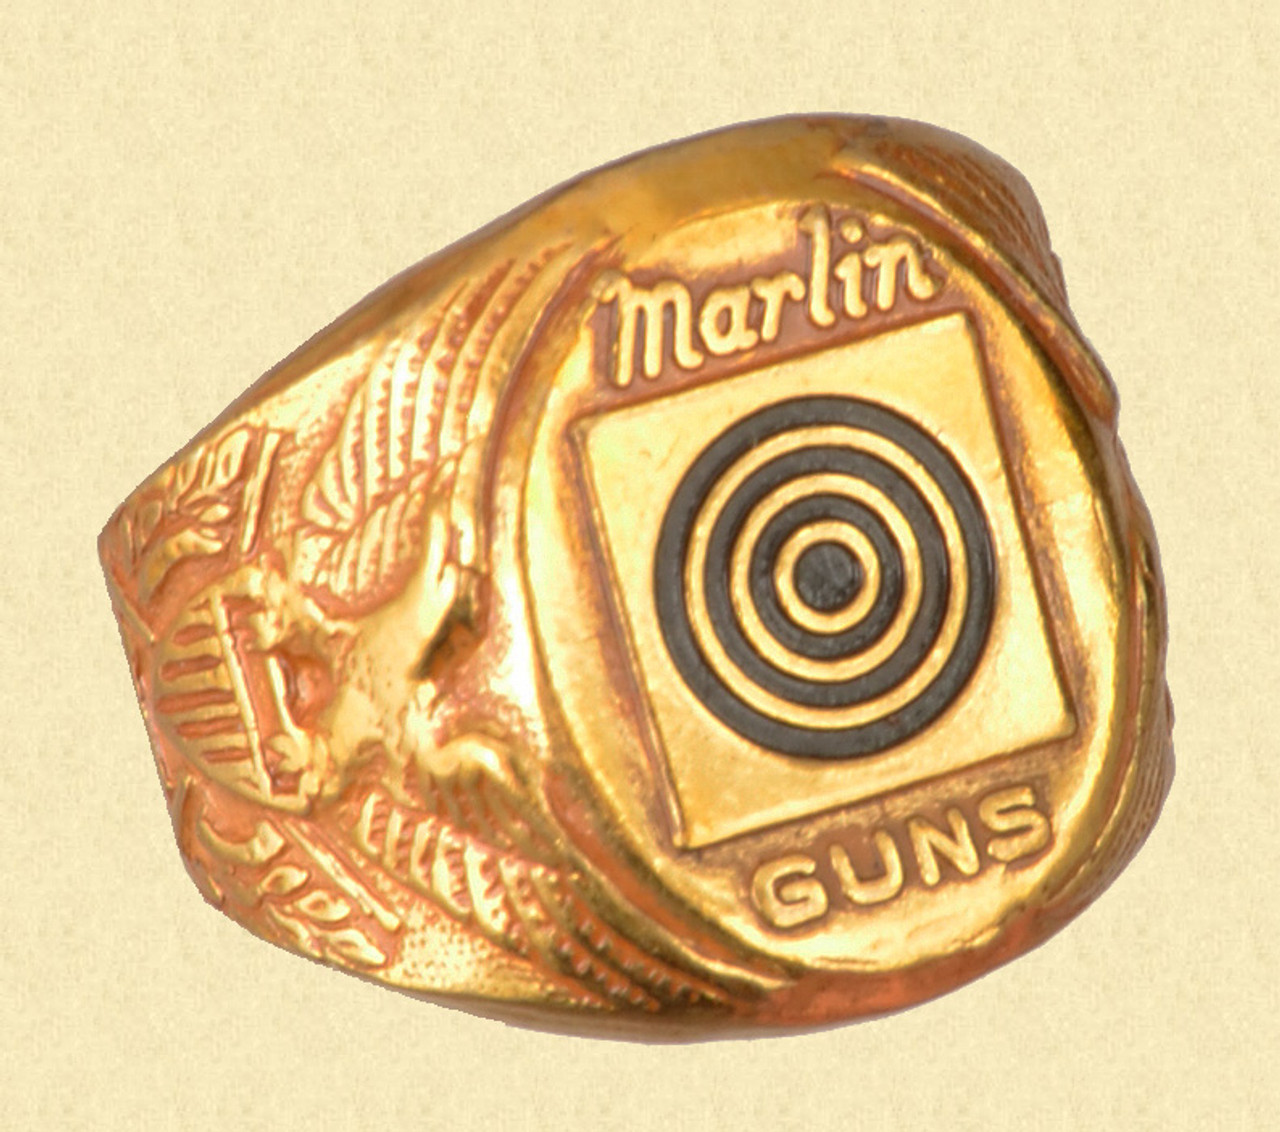 MARLIN Promotional Ring - M10170